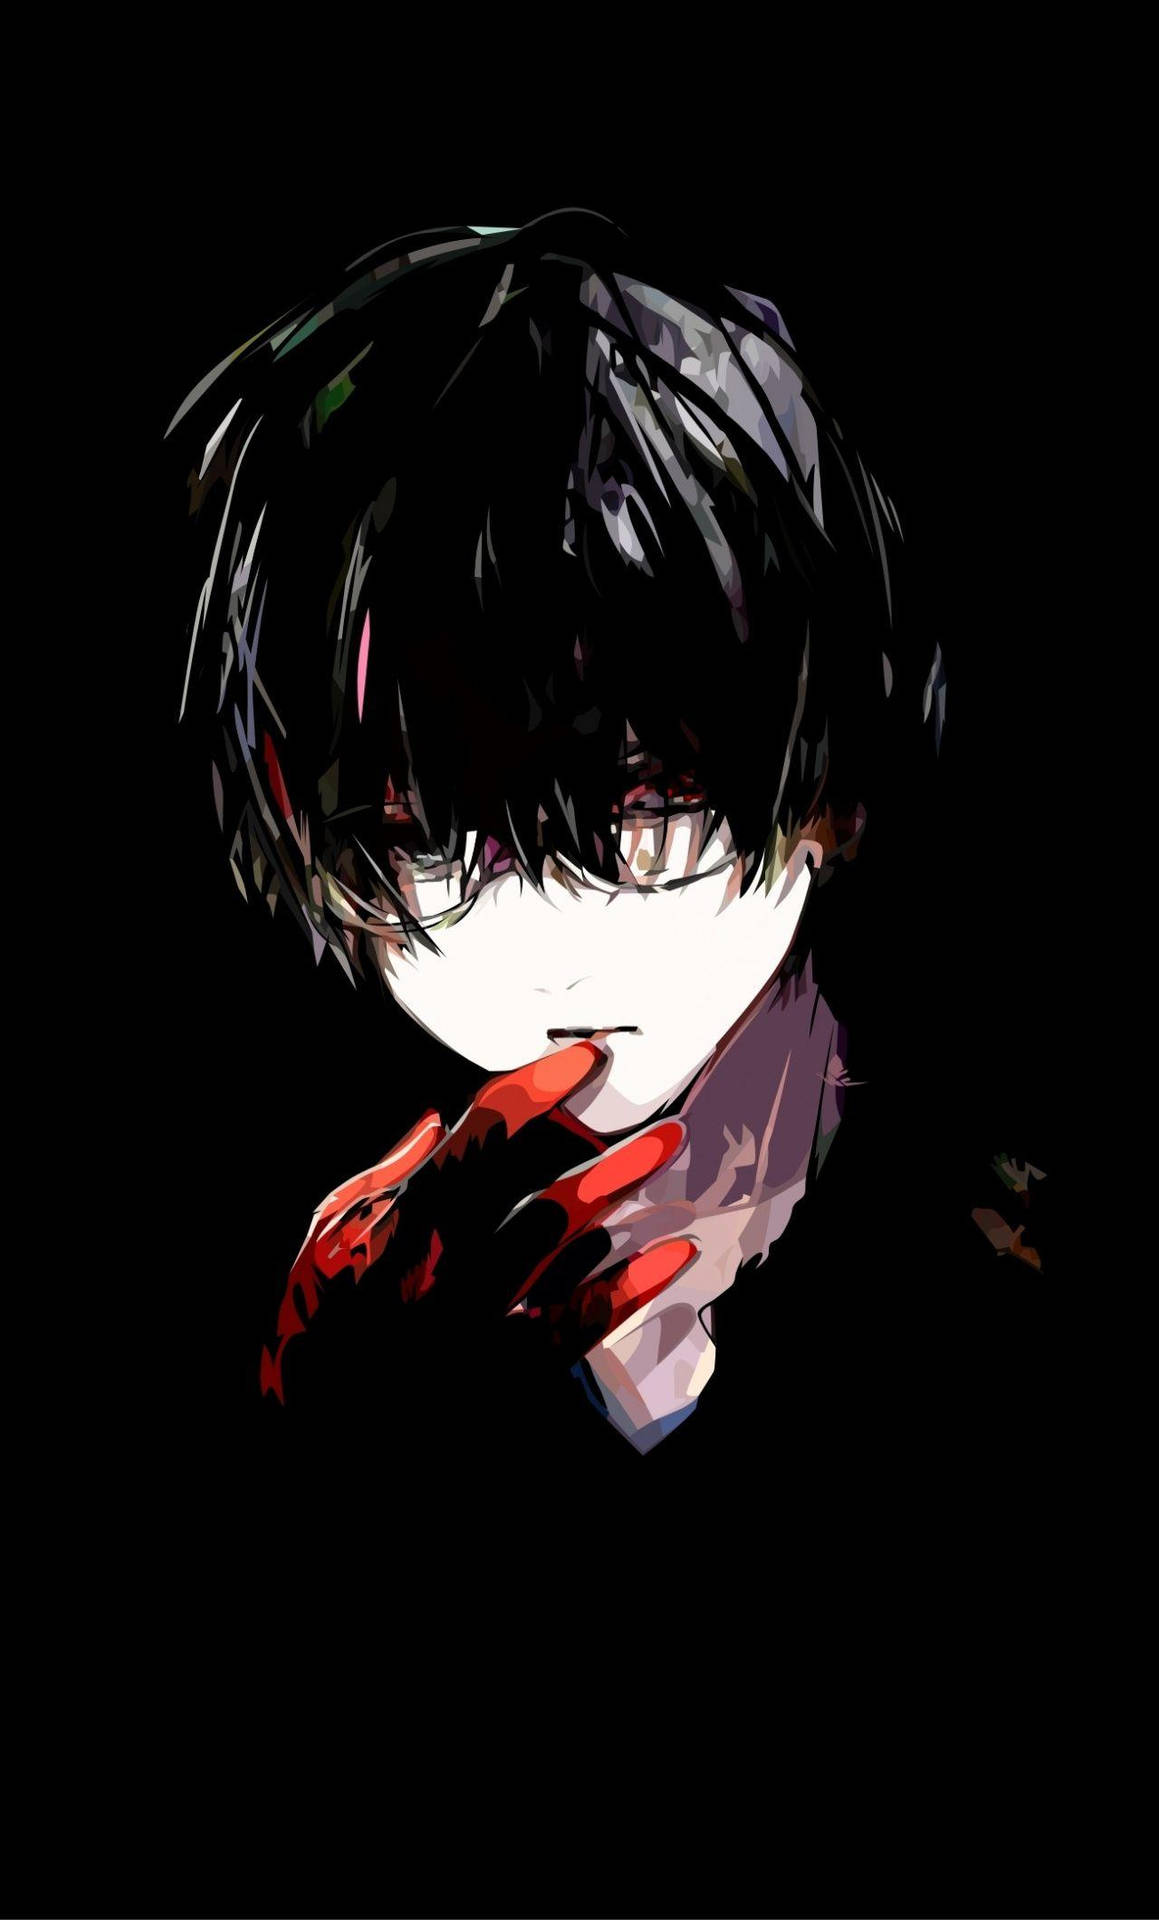 Download Sad Anime Boy With Red Hand Wallpaper 